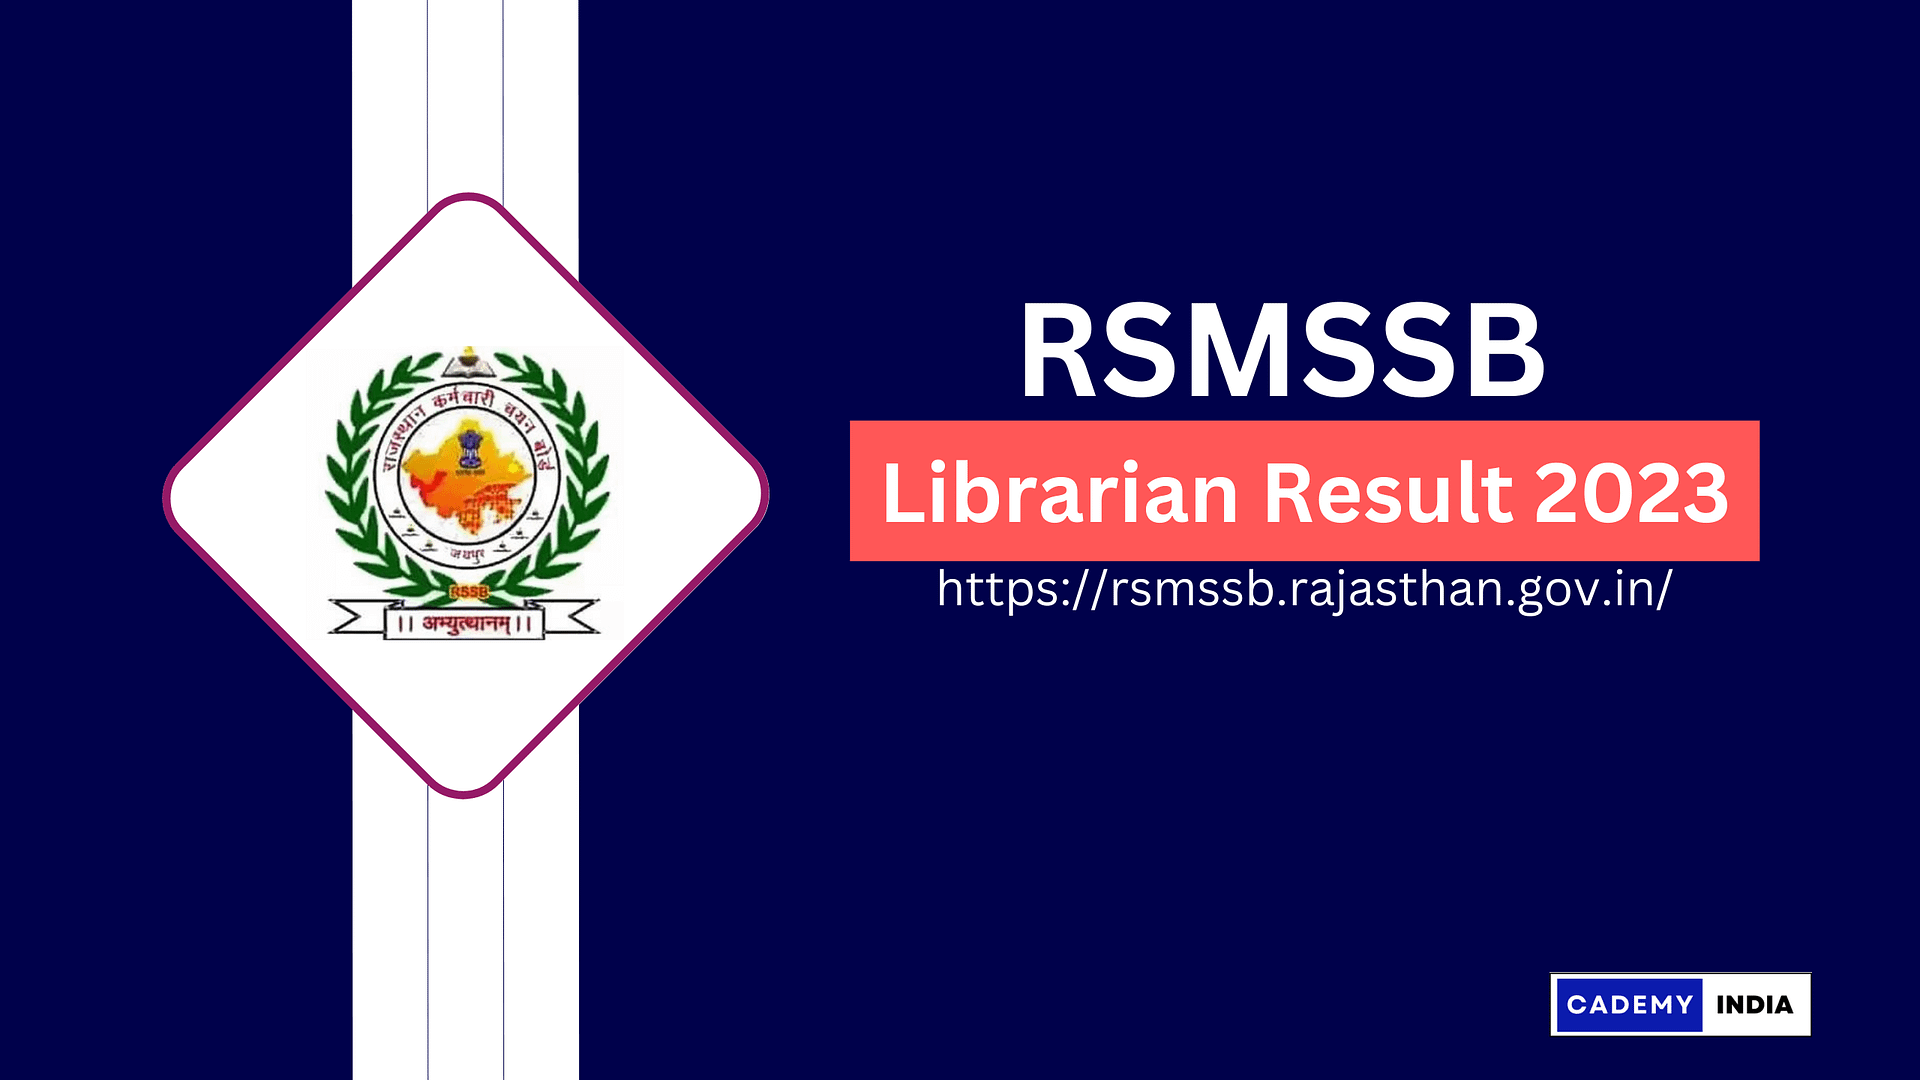 Cut off marks for the 2023 RSMSSB Librarian Result have been released.